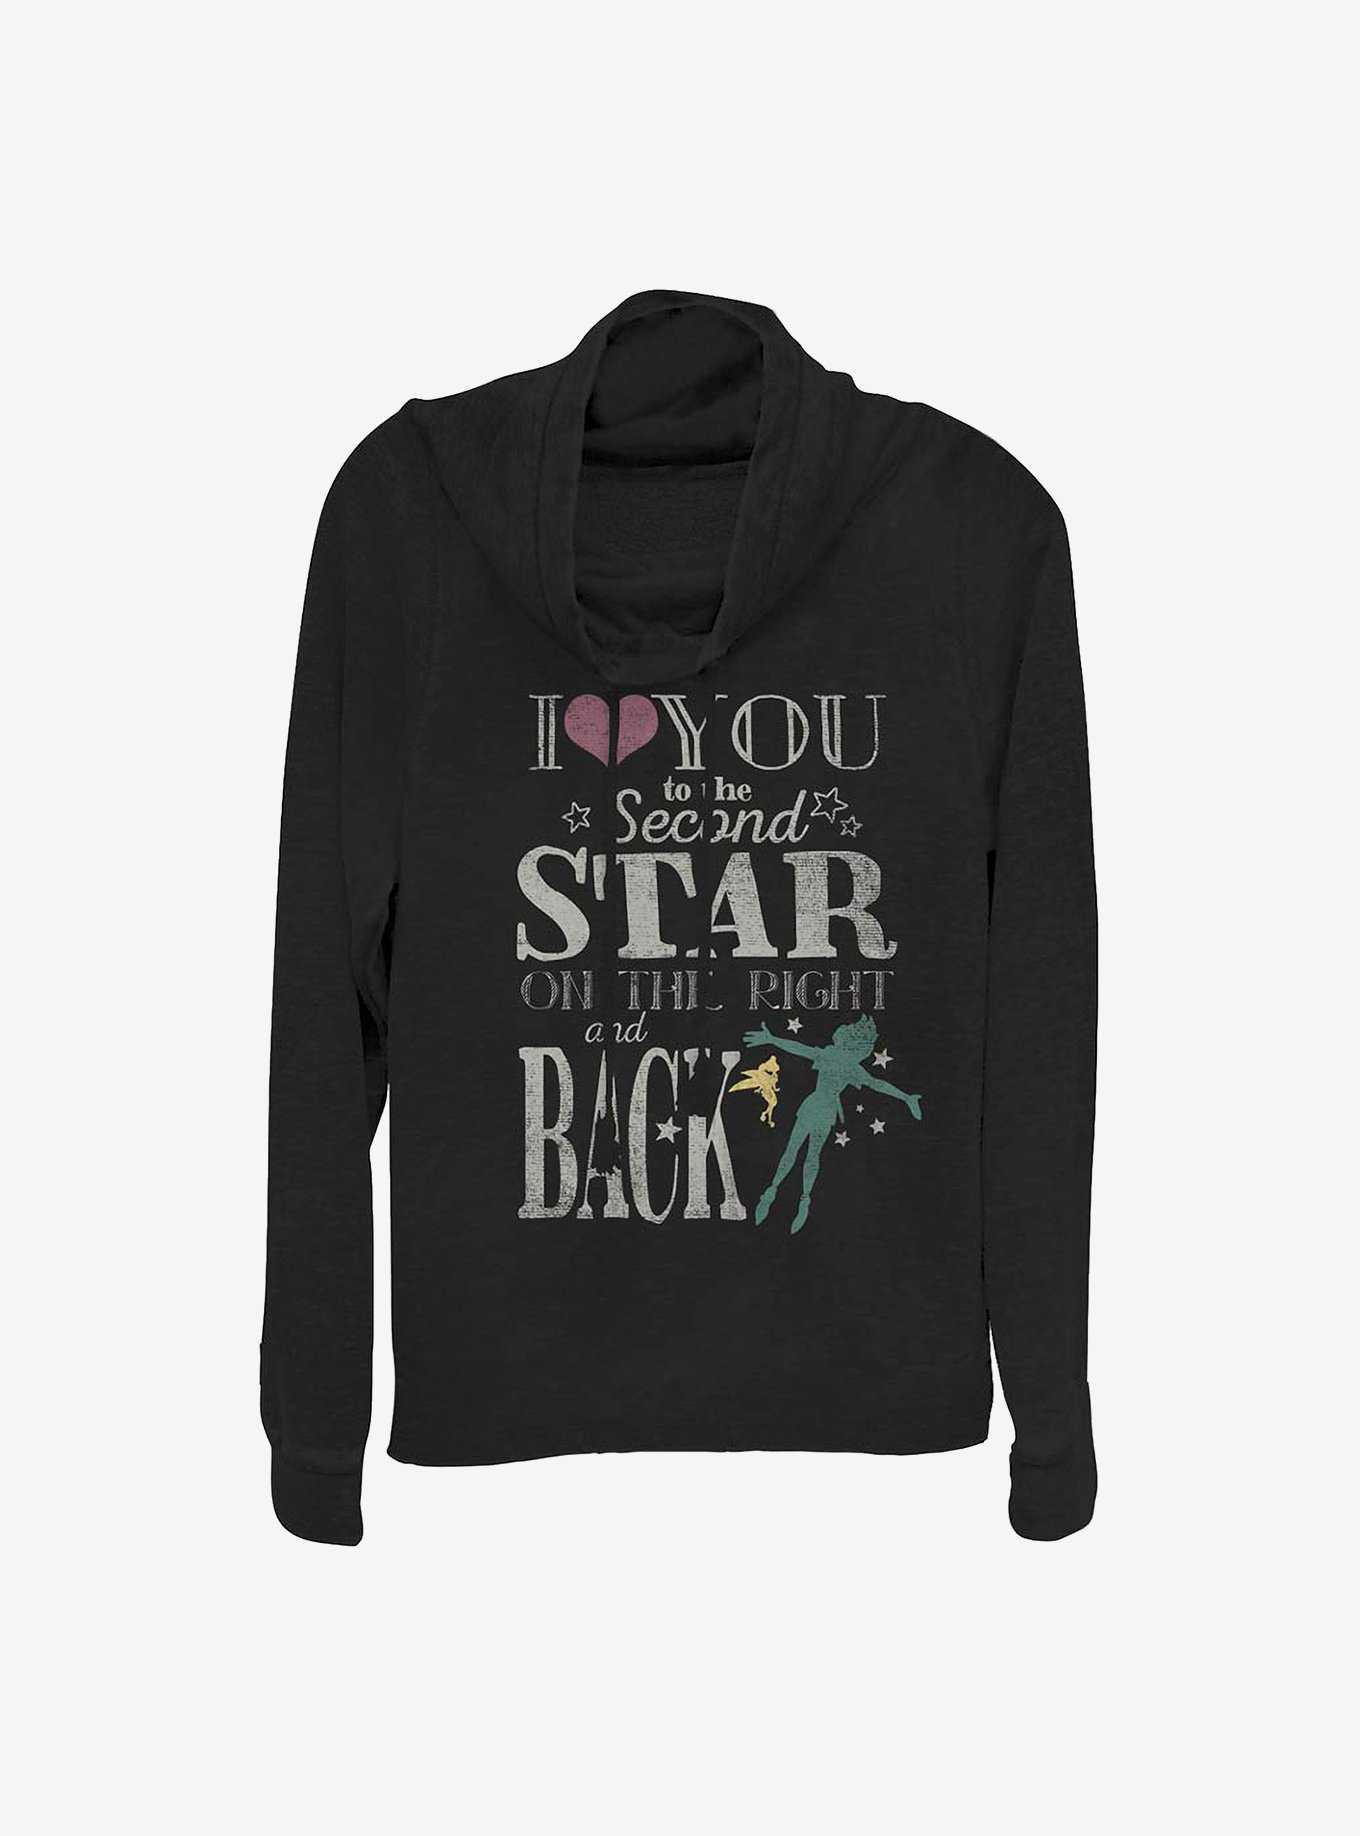 Disney Peter Pan Love You To The Second Star Cowlneck Long-Sleeve Girls Top, , hi-res